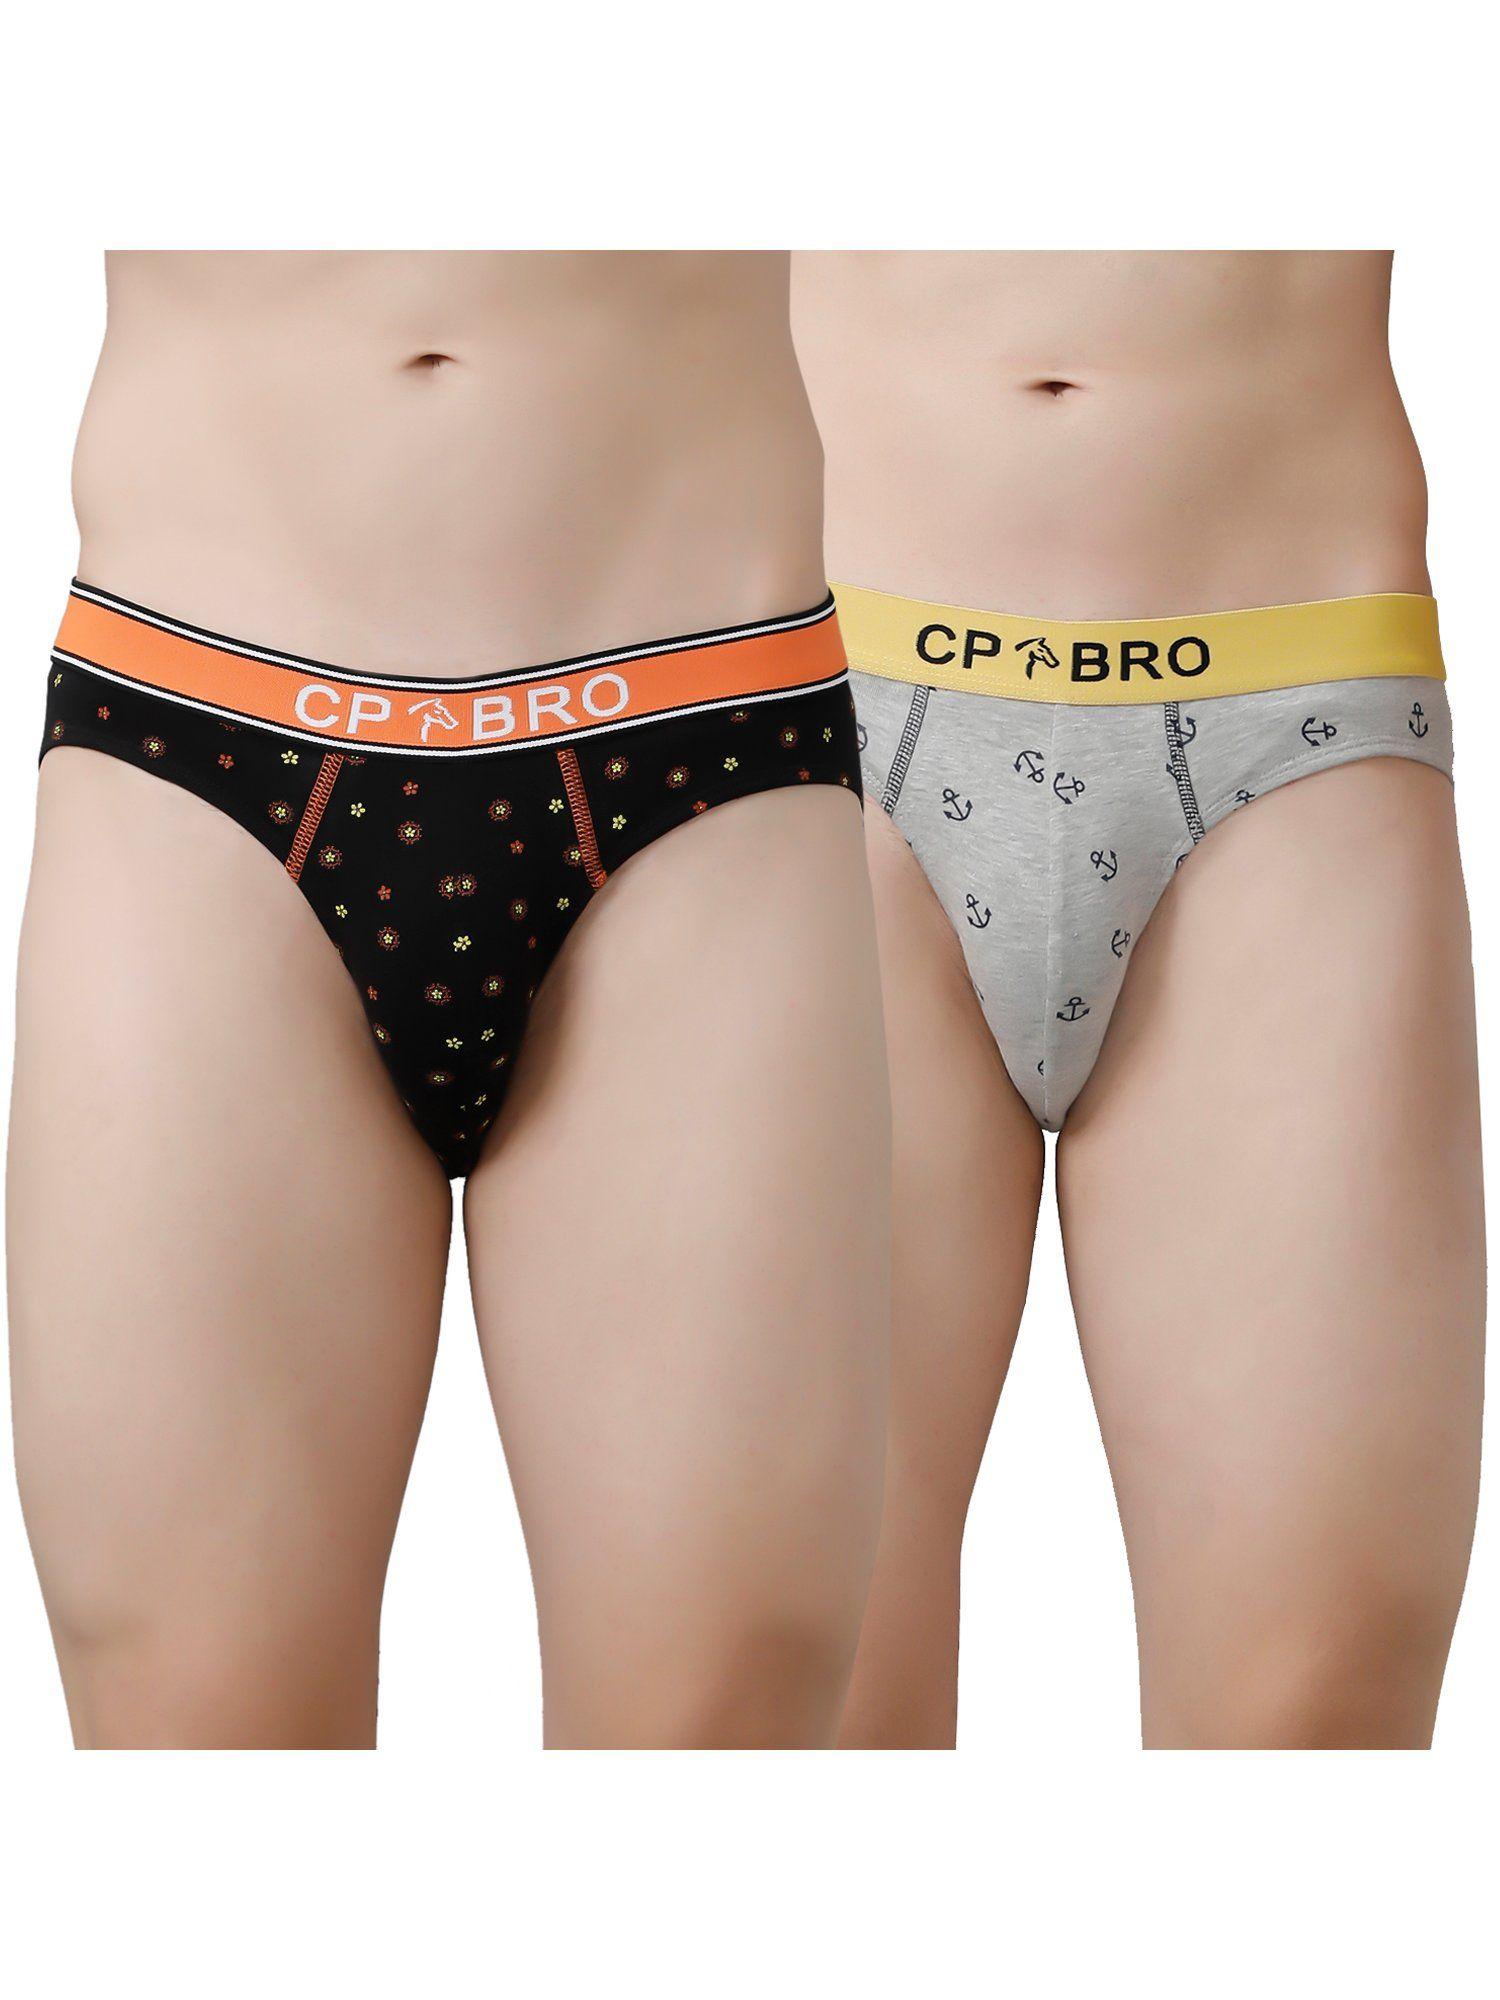 printed briefs with exposed waistband value - black dot & grey anchor (pack of 2)